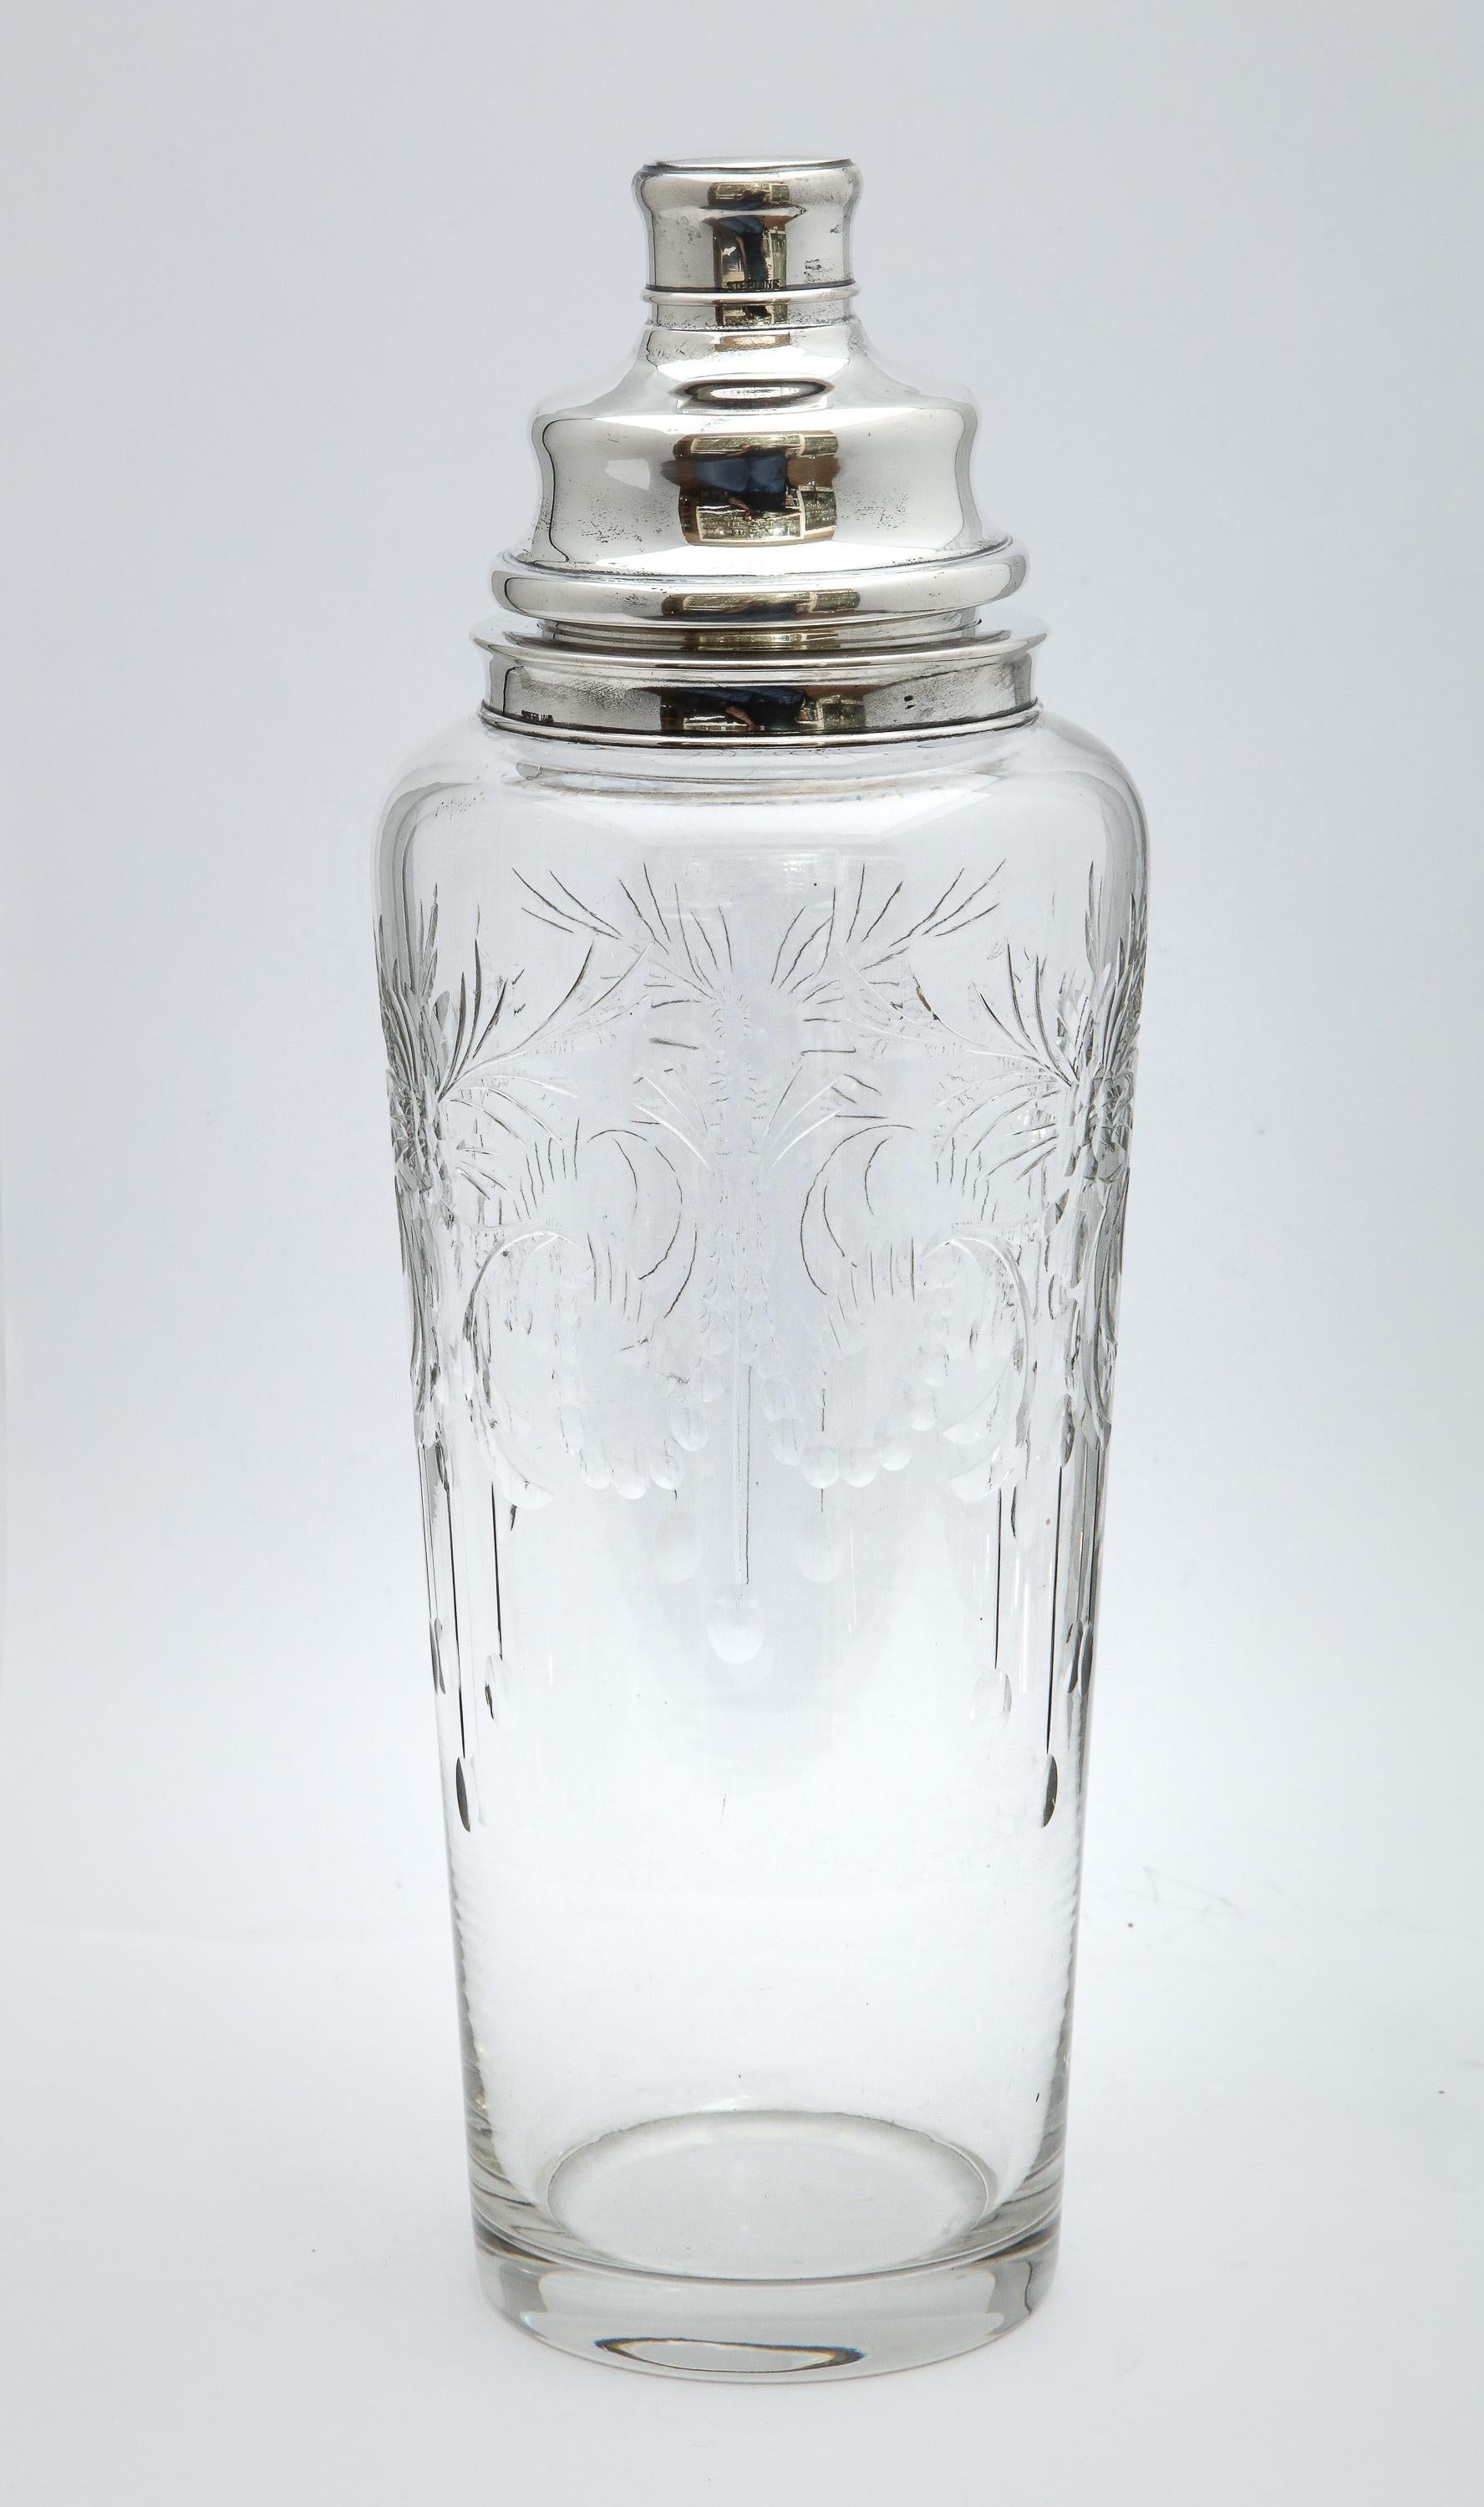 Large, Art Deco, sterling silver-mounted, wheel cut cocktail shaker, T.G. Hawkes and Company, New York, circa 1925. Measures: 13 inches high x 4 1/2 inches diameter at widest point. Beautiful wheel cut glass. Underside of glass shaker is signed with